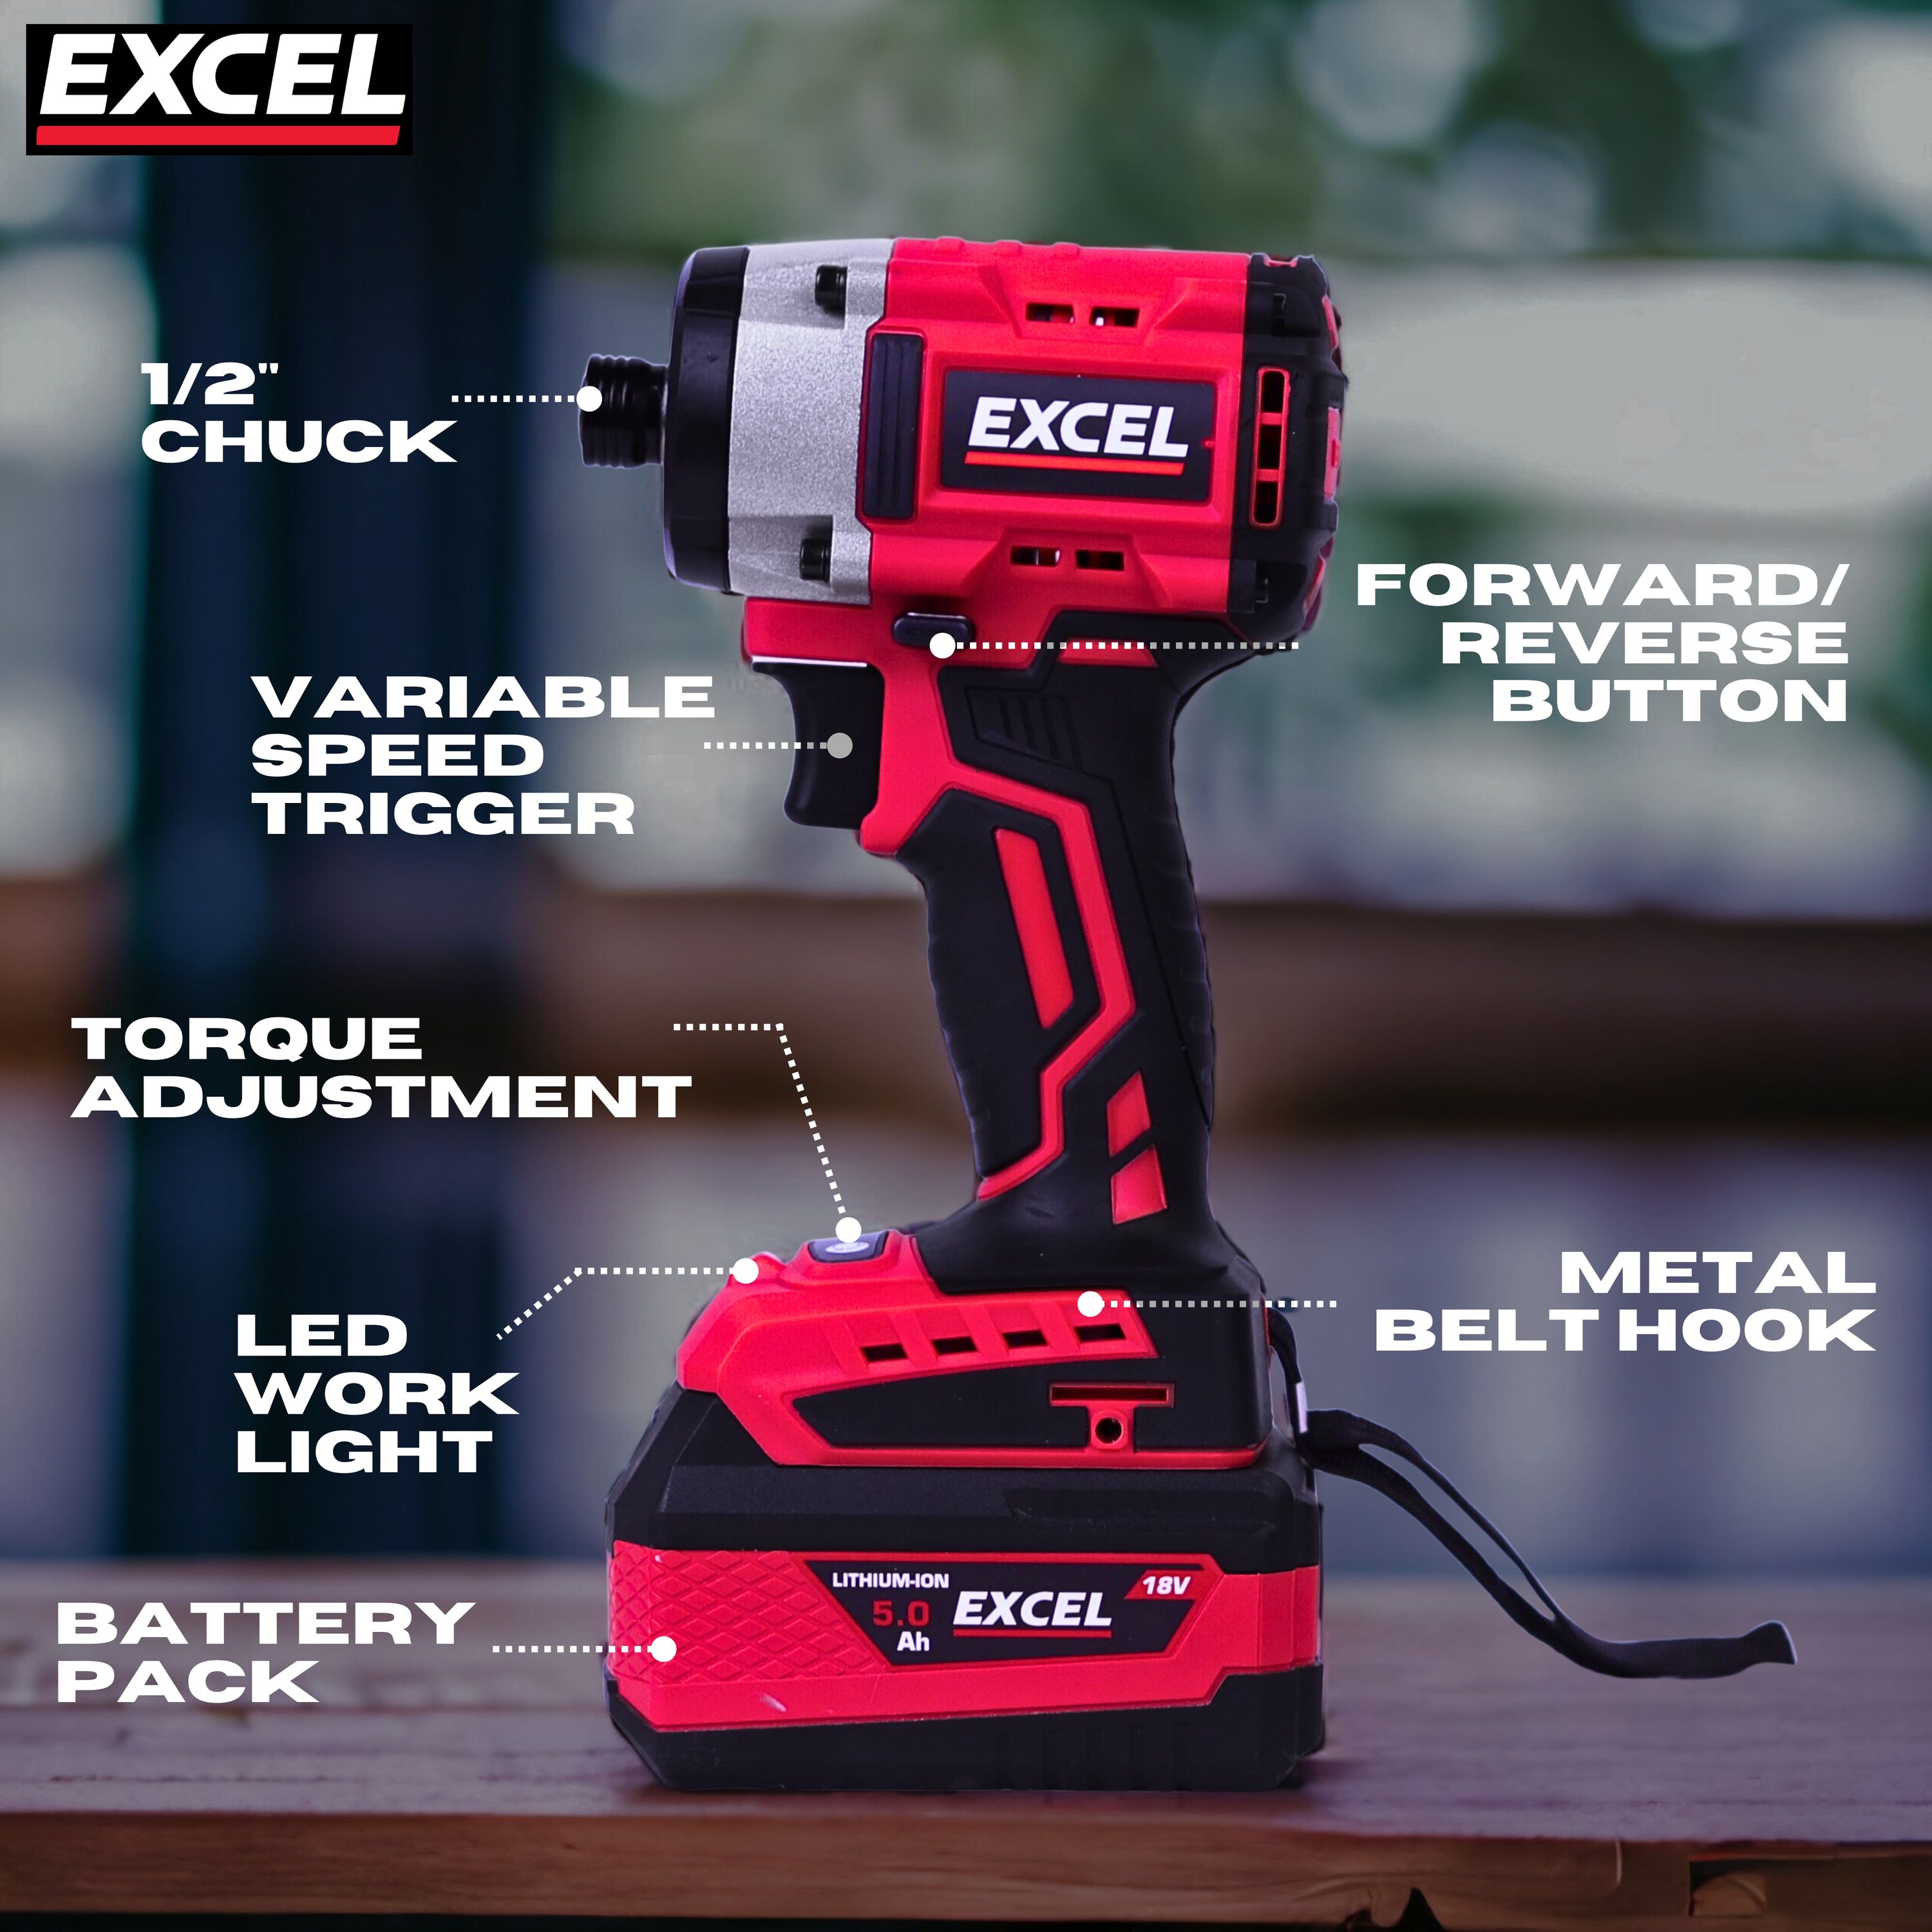 Excel 18V 10 Piece Power Tool Kit with 4 x 5.0Ah Batteries & Charger EXLKIT-16296